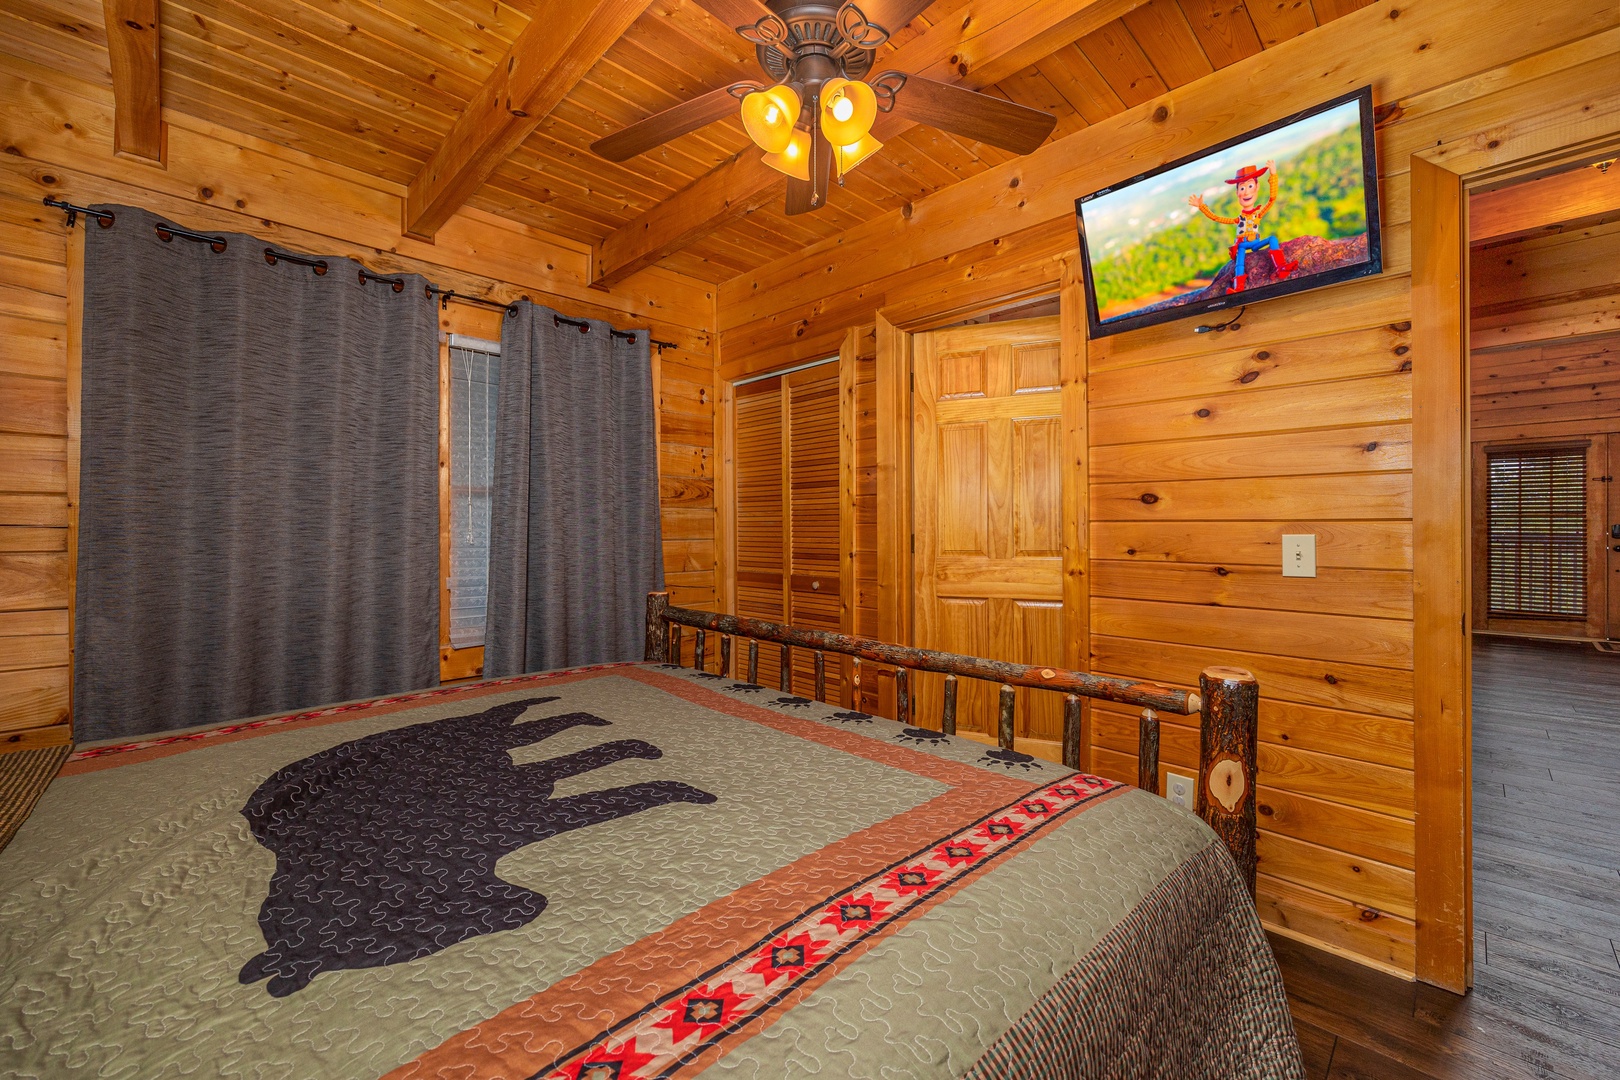 Flat screen in the bedroom at Eagle's Nest, a 2 bedroom cabin rental located in sevierville